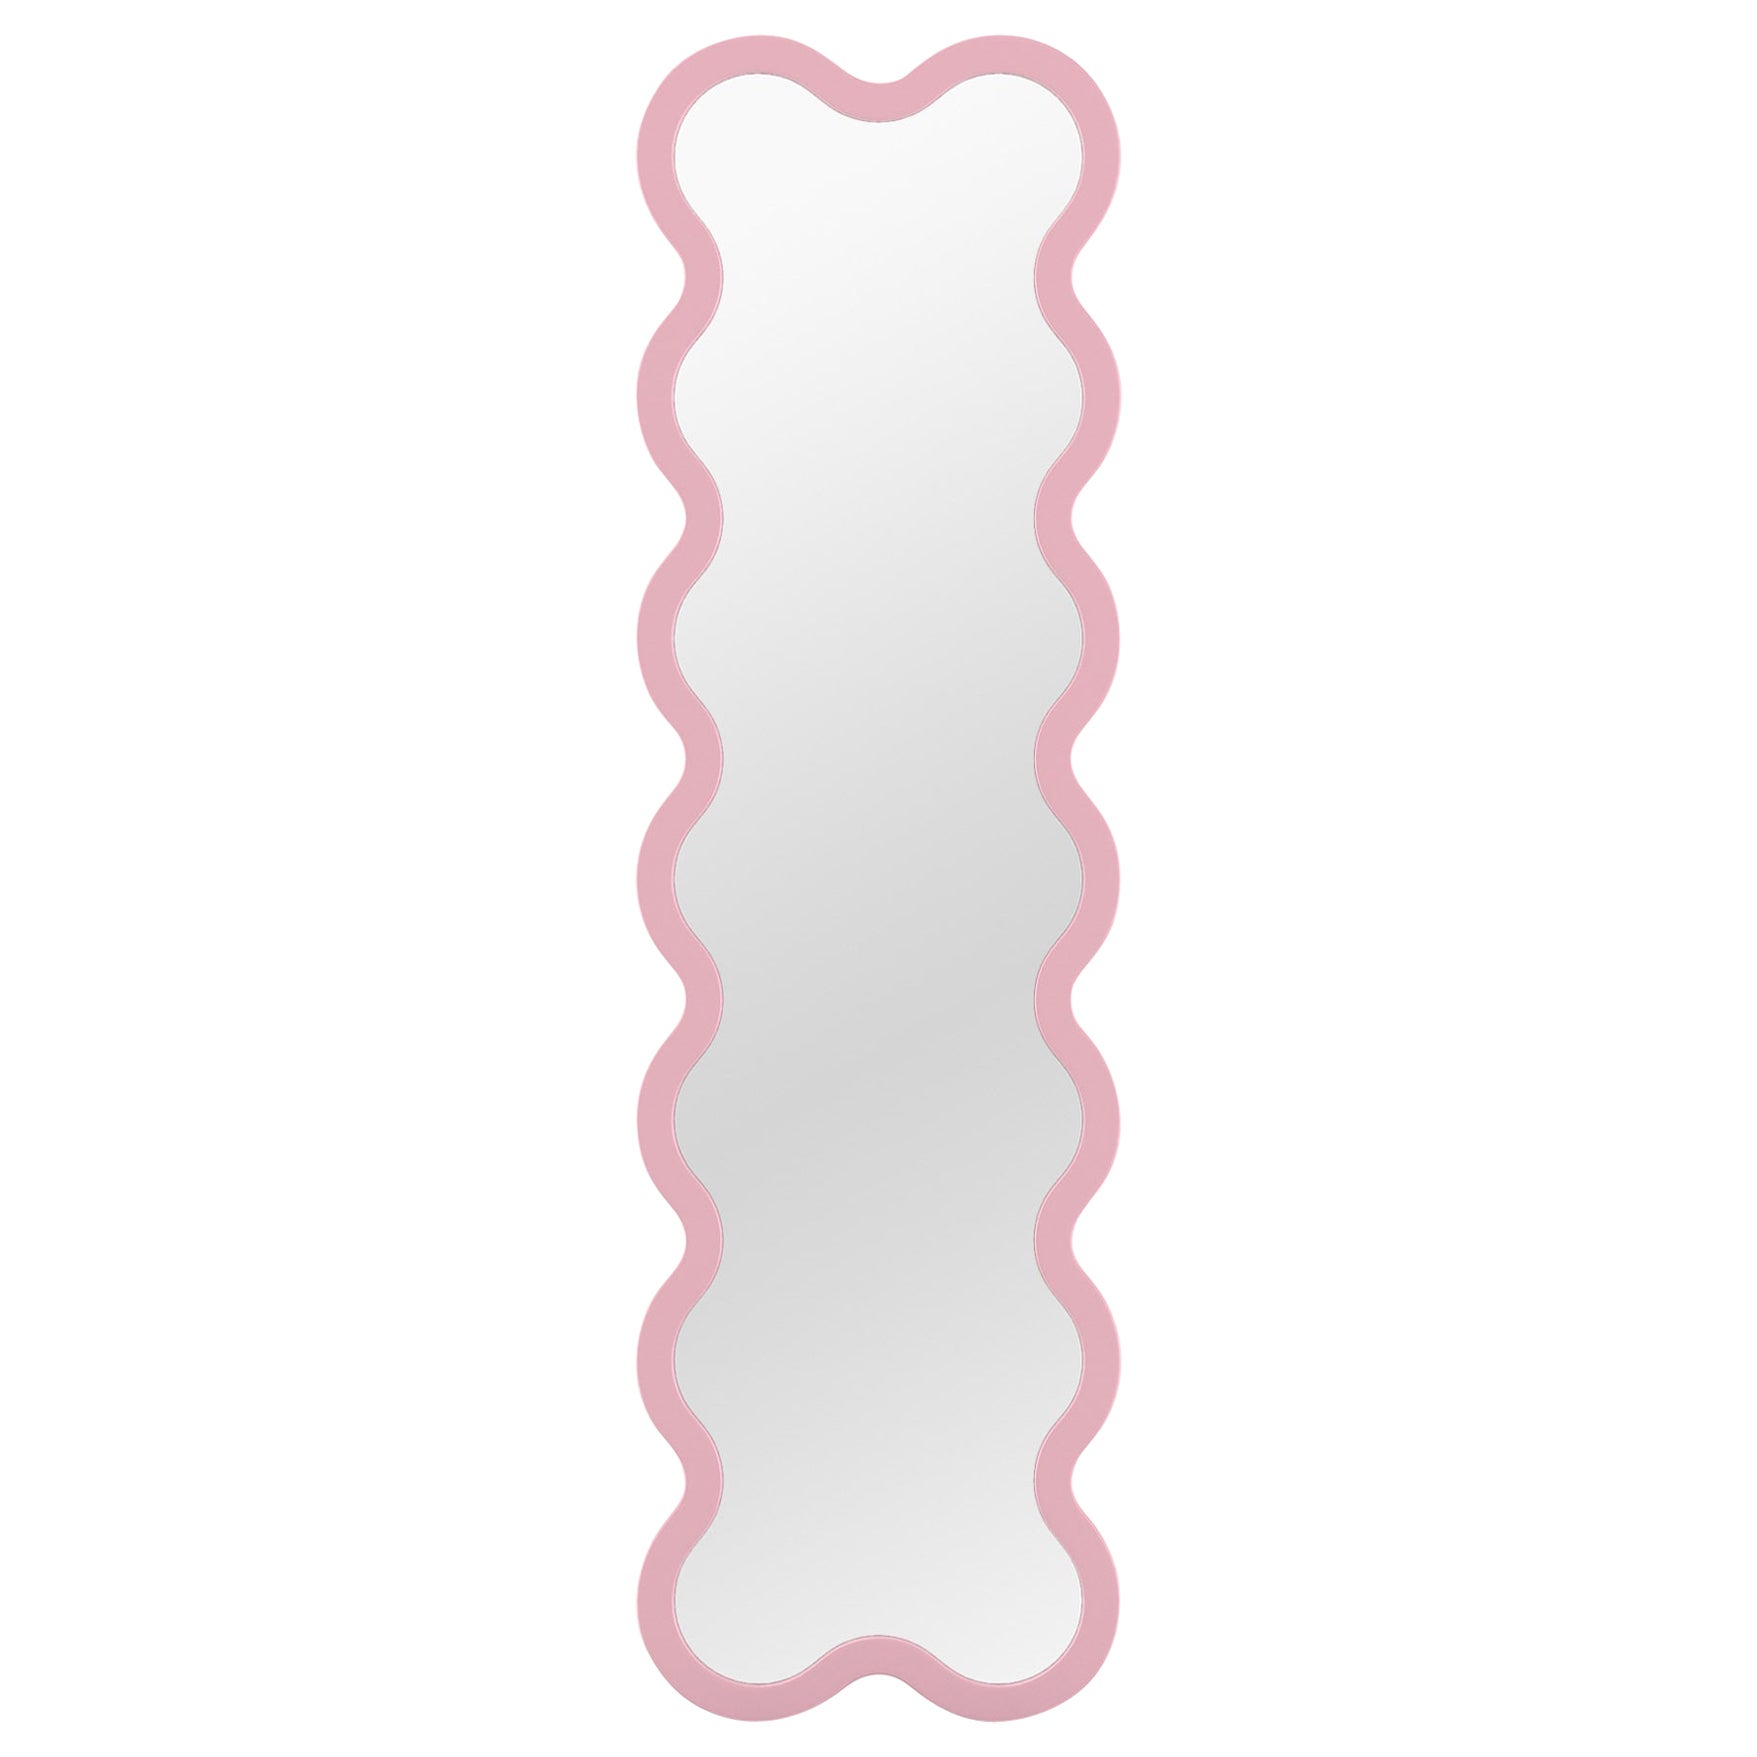 Contemporary Mirror 'Hvyli 14' by Oitoproducts, Light Pink Frame